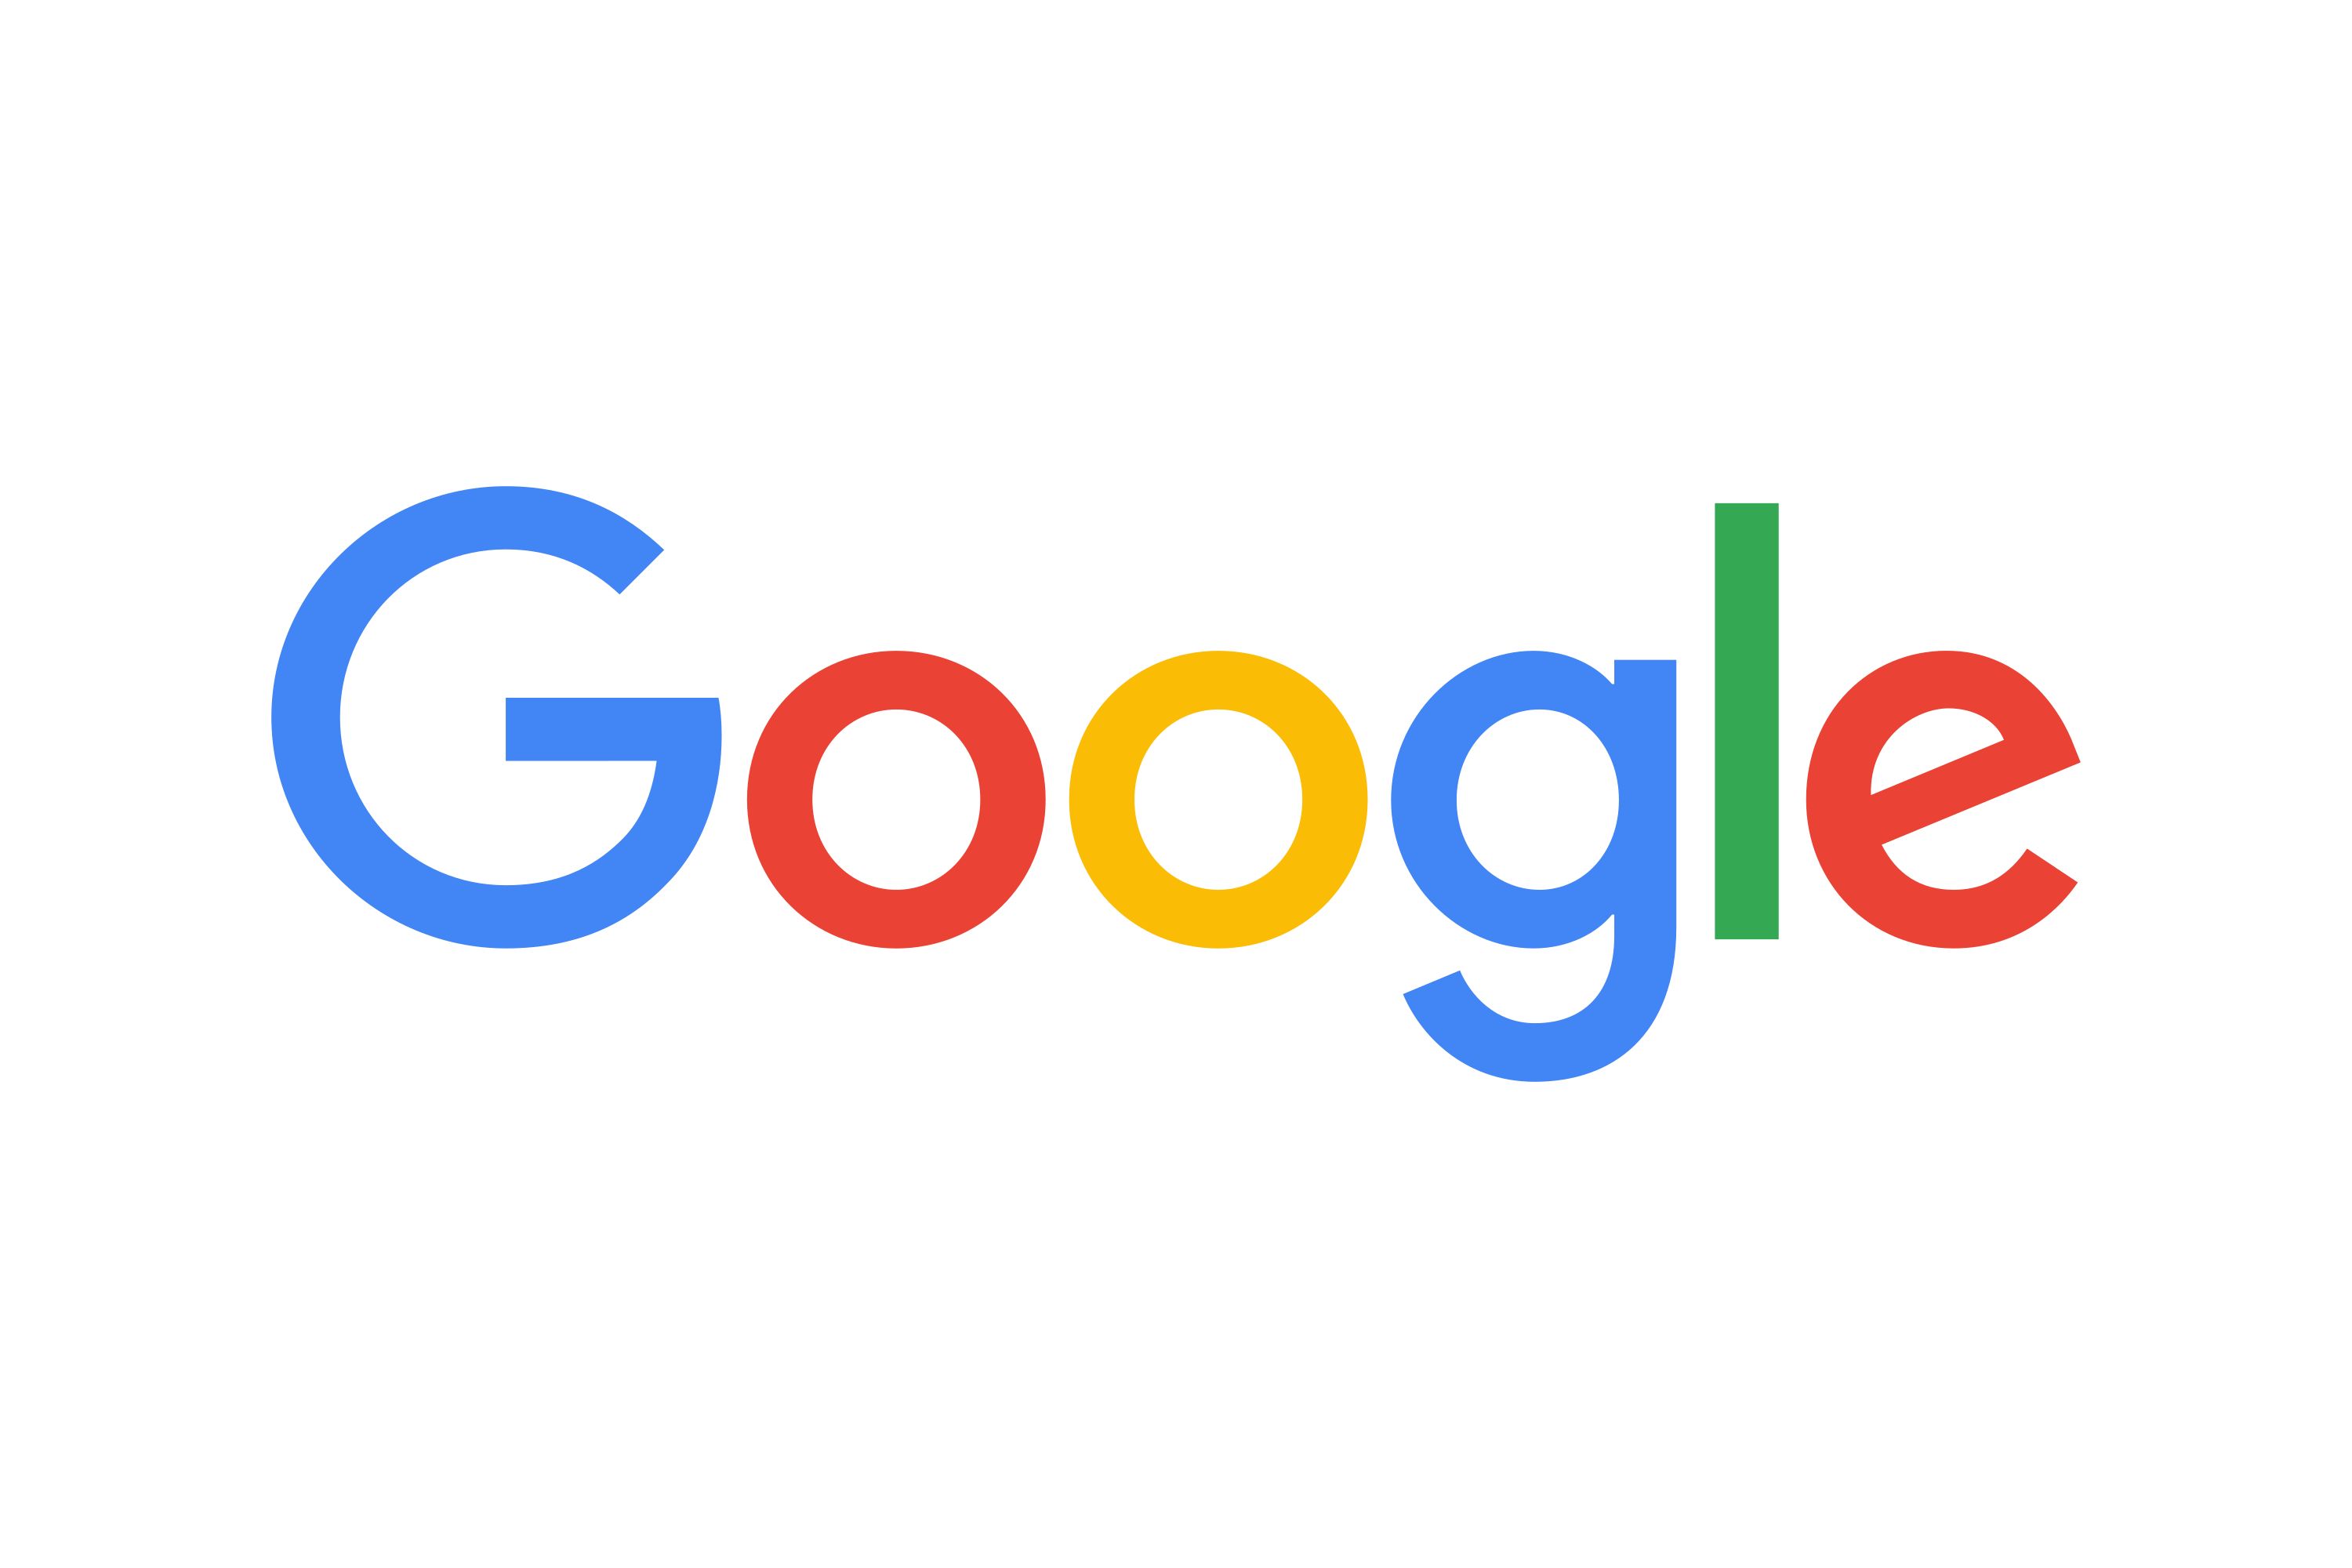 Google is offering internship opportunity as Software Engineering